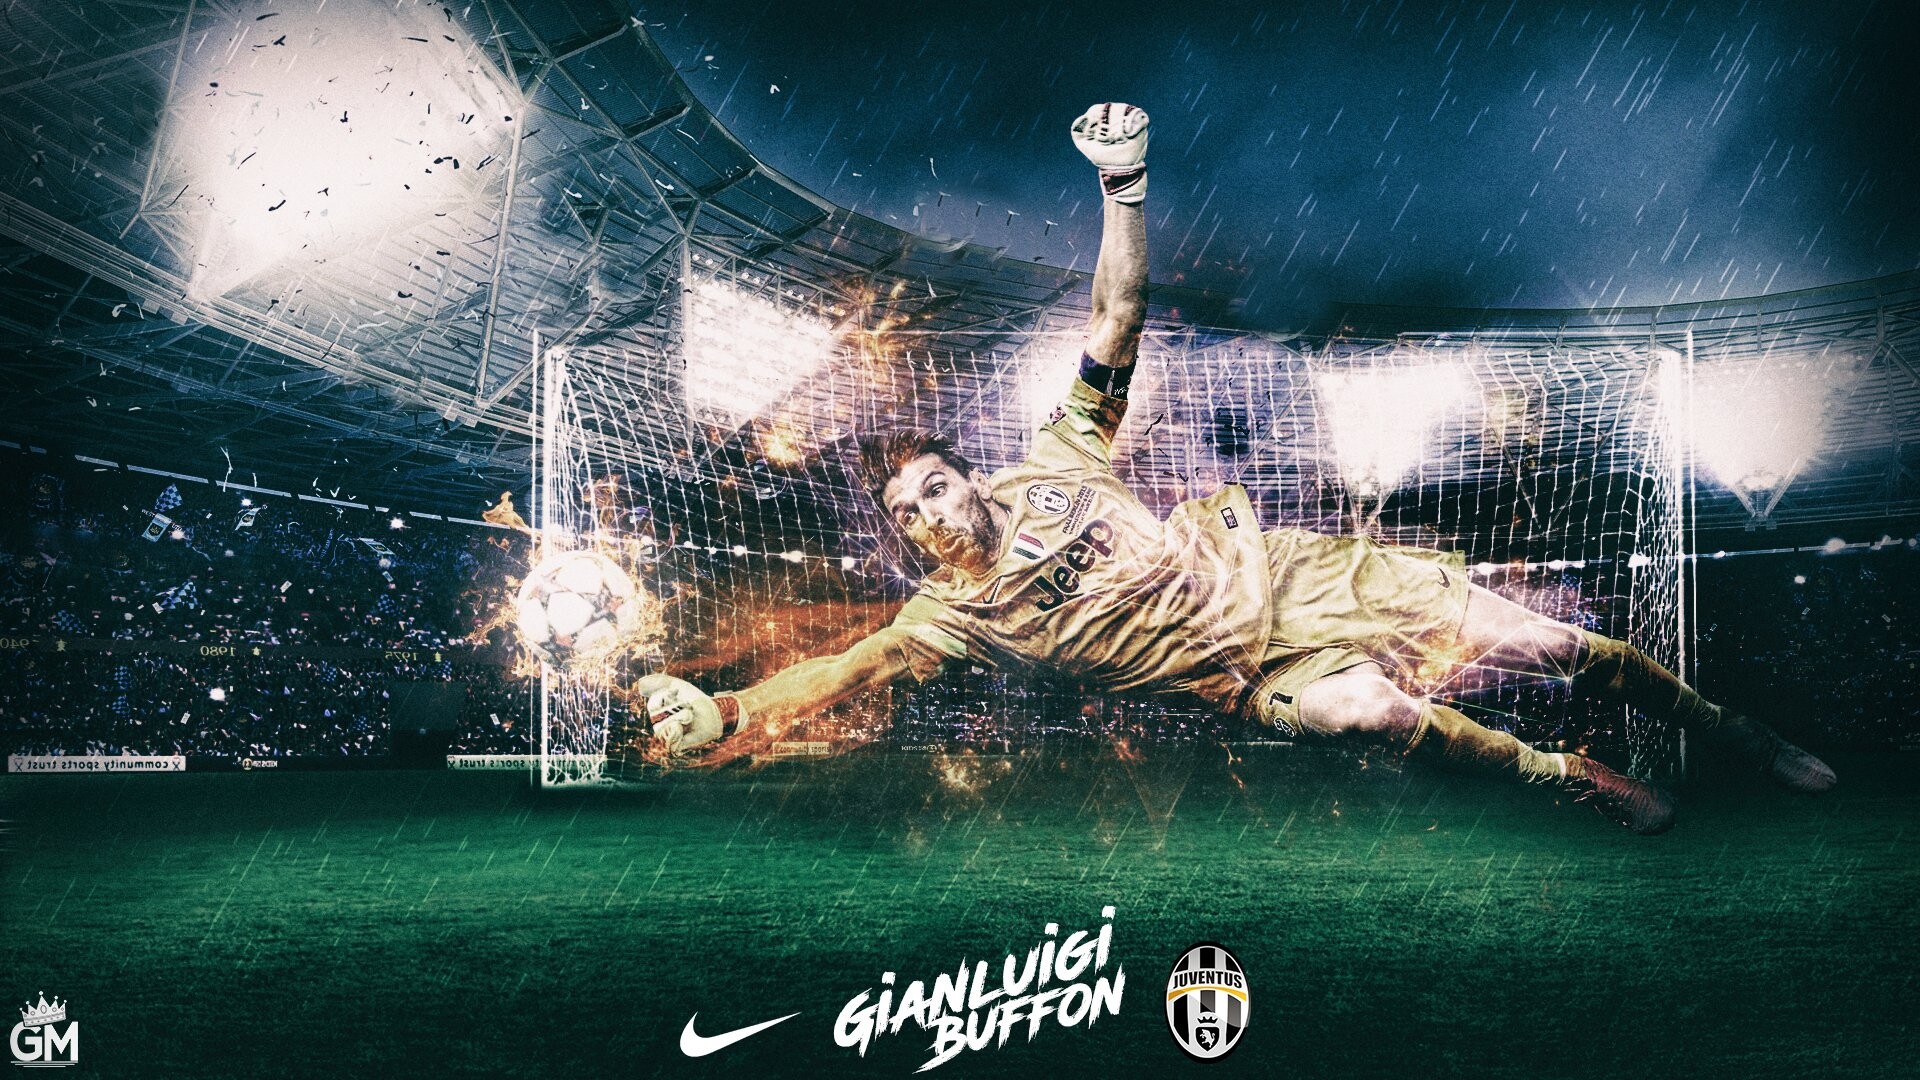 Gianluigi Buffon: Superman, The only goalkeeper to win the UEFA Club Footballer of the Year award. 1920x1080 Full HD Background.